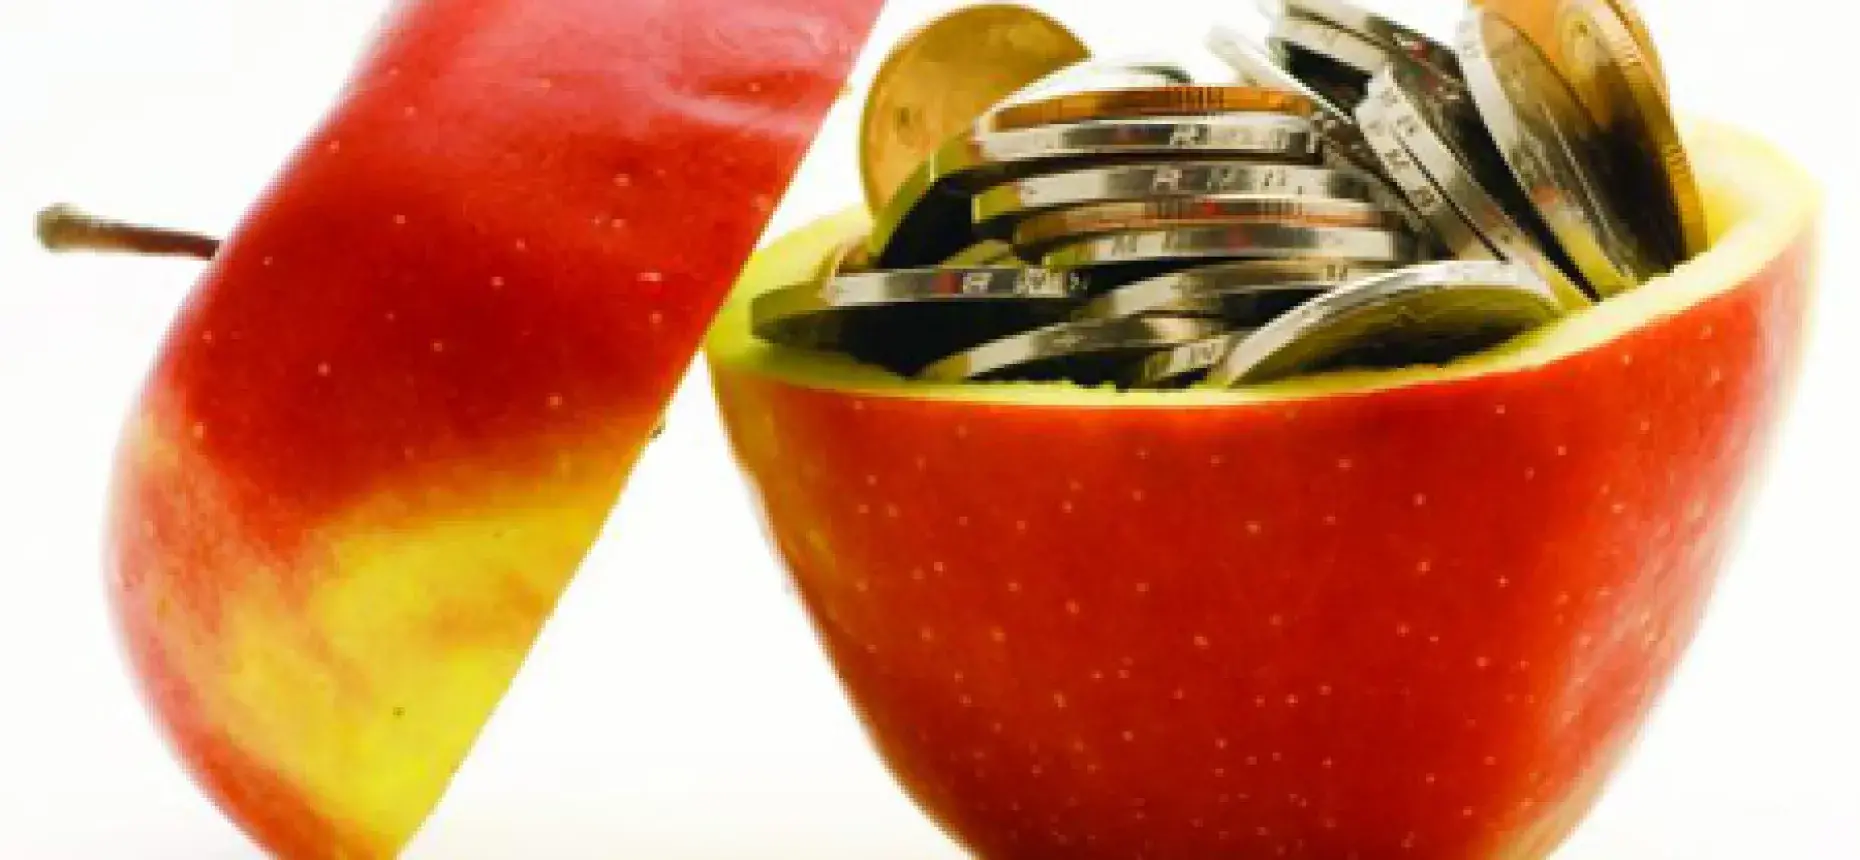 apple filled with coins